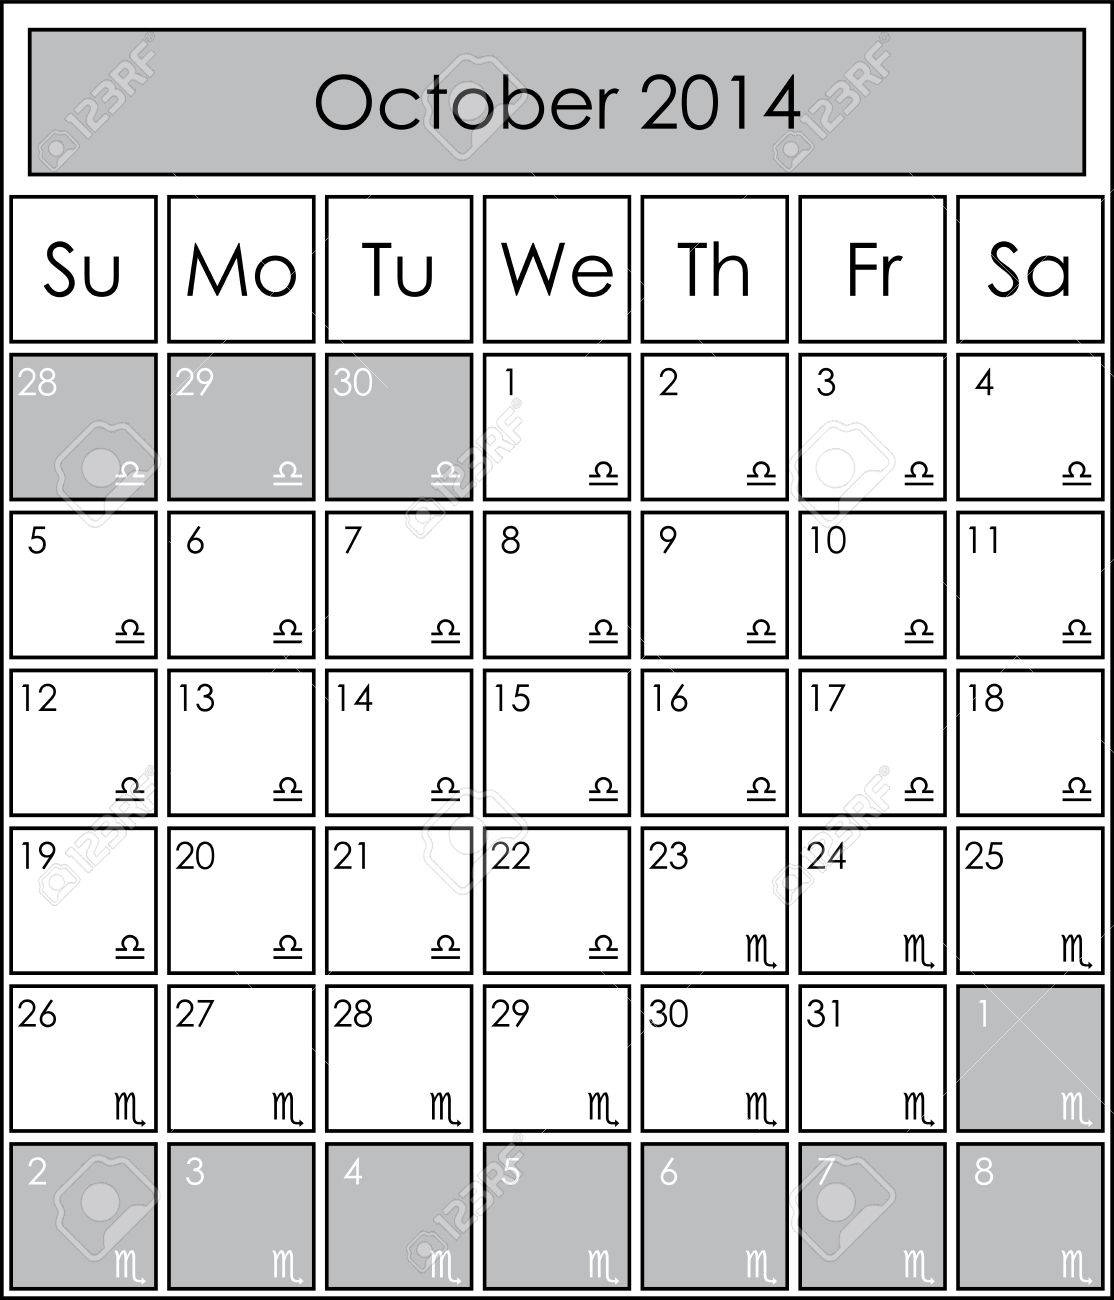 2014 Calendar Monthly, October, With Zodiac Signs Royalty Free Zodiac Calendar For October